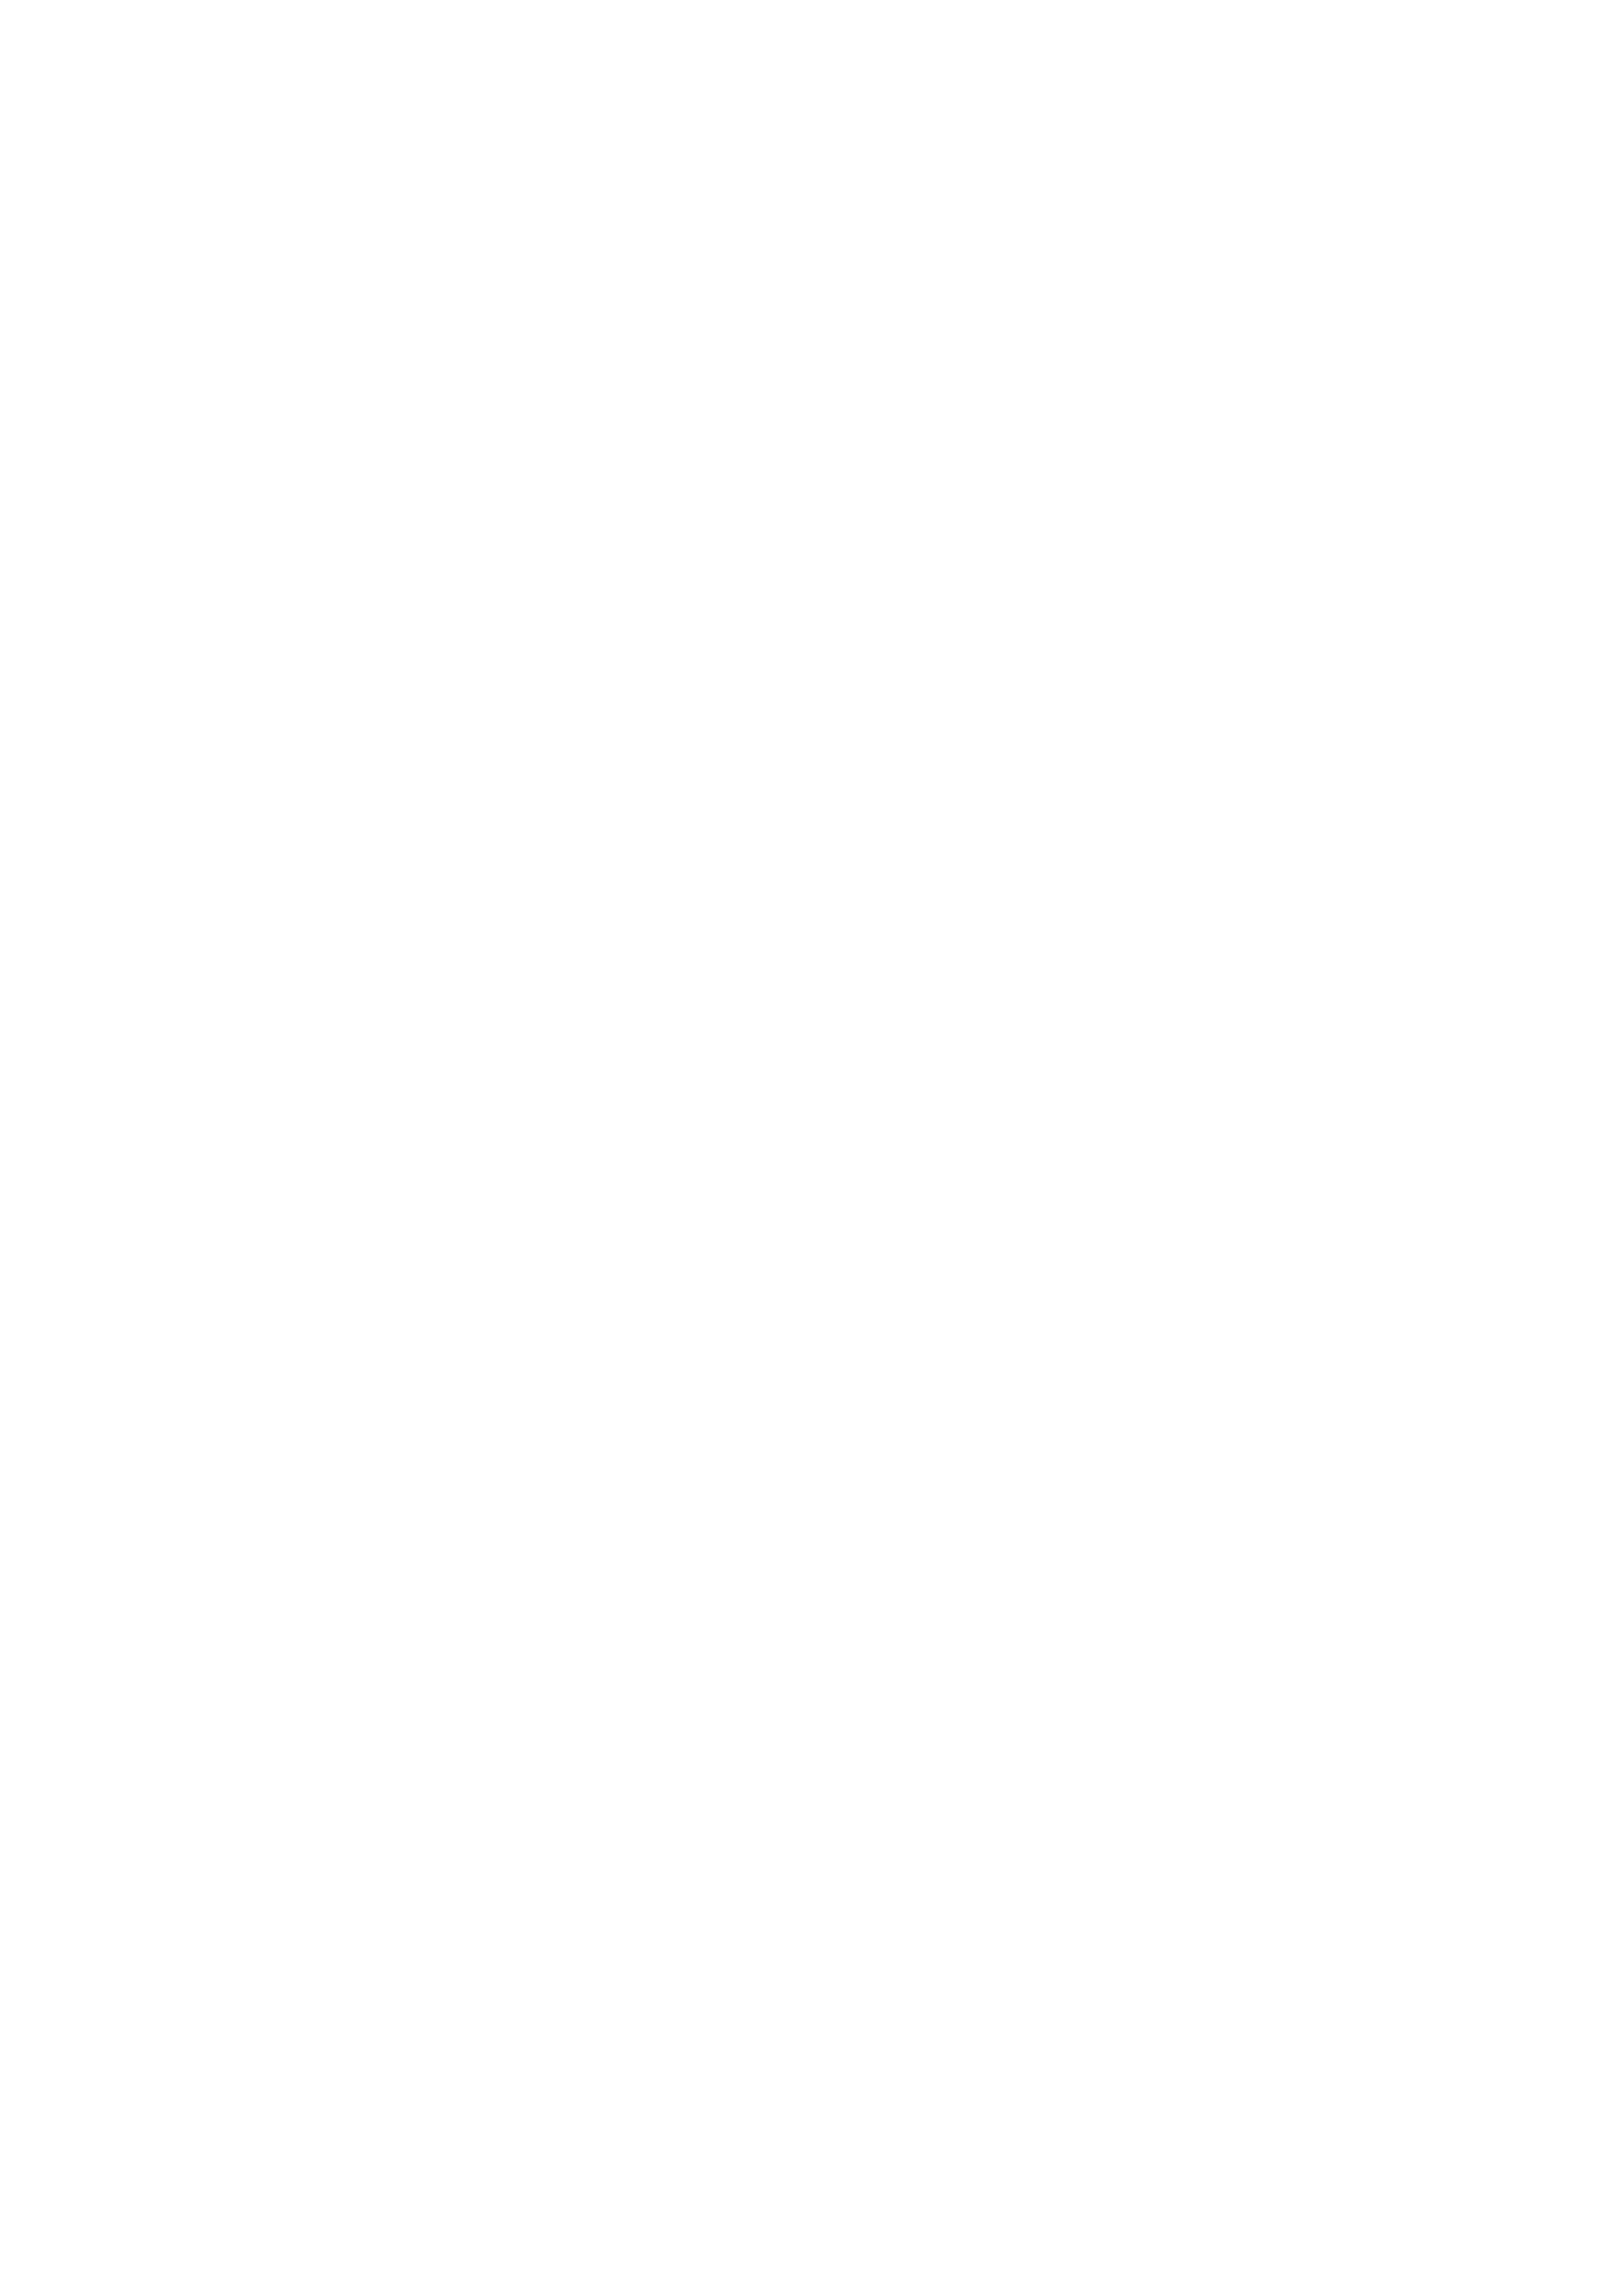 my-name-is-jota-photography